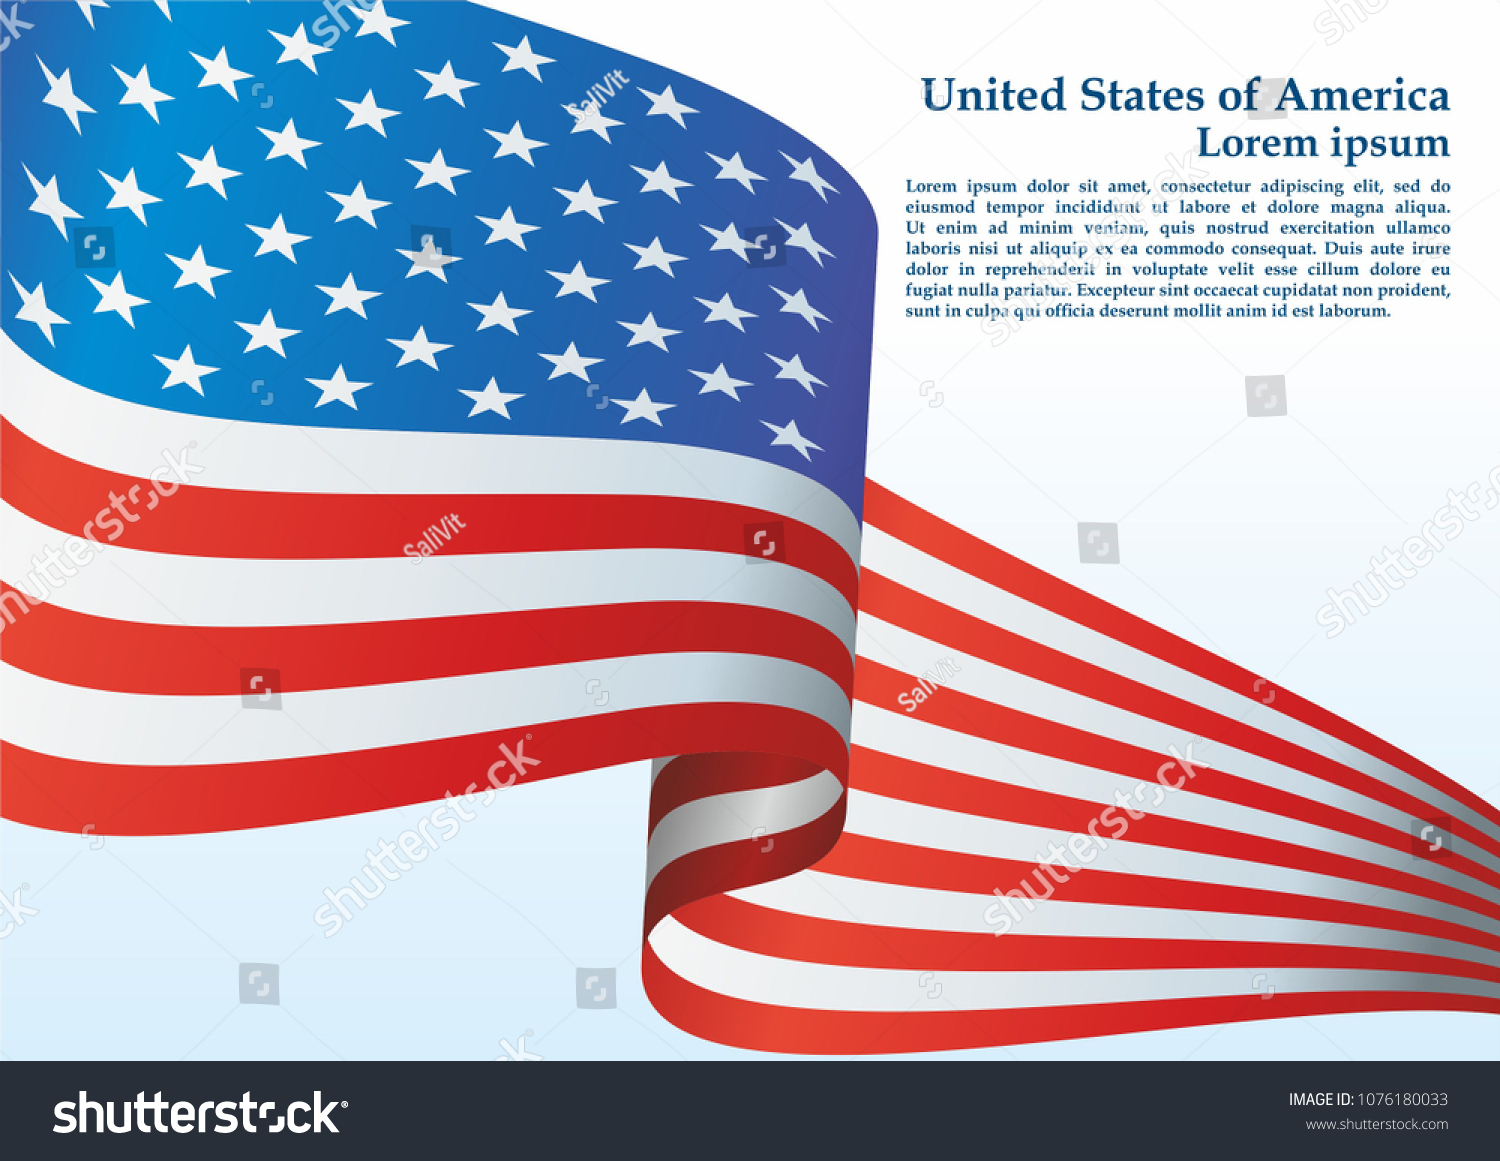 Flag of the United States, The American flag, The Stars and Stripes; Red, White, and Blue; Bright, colorful vector illustration #1076180033